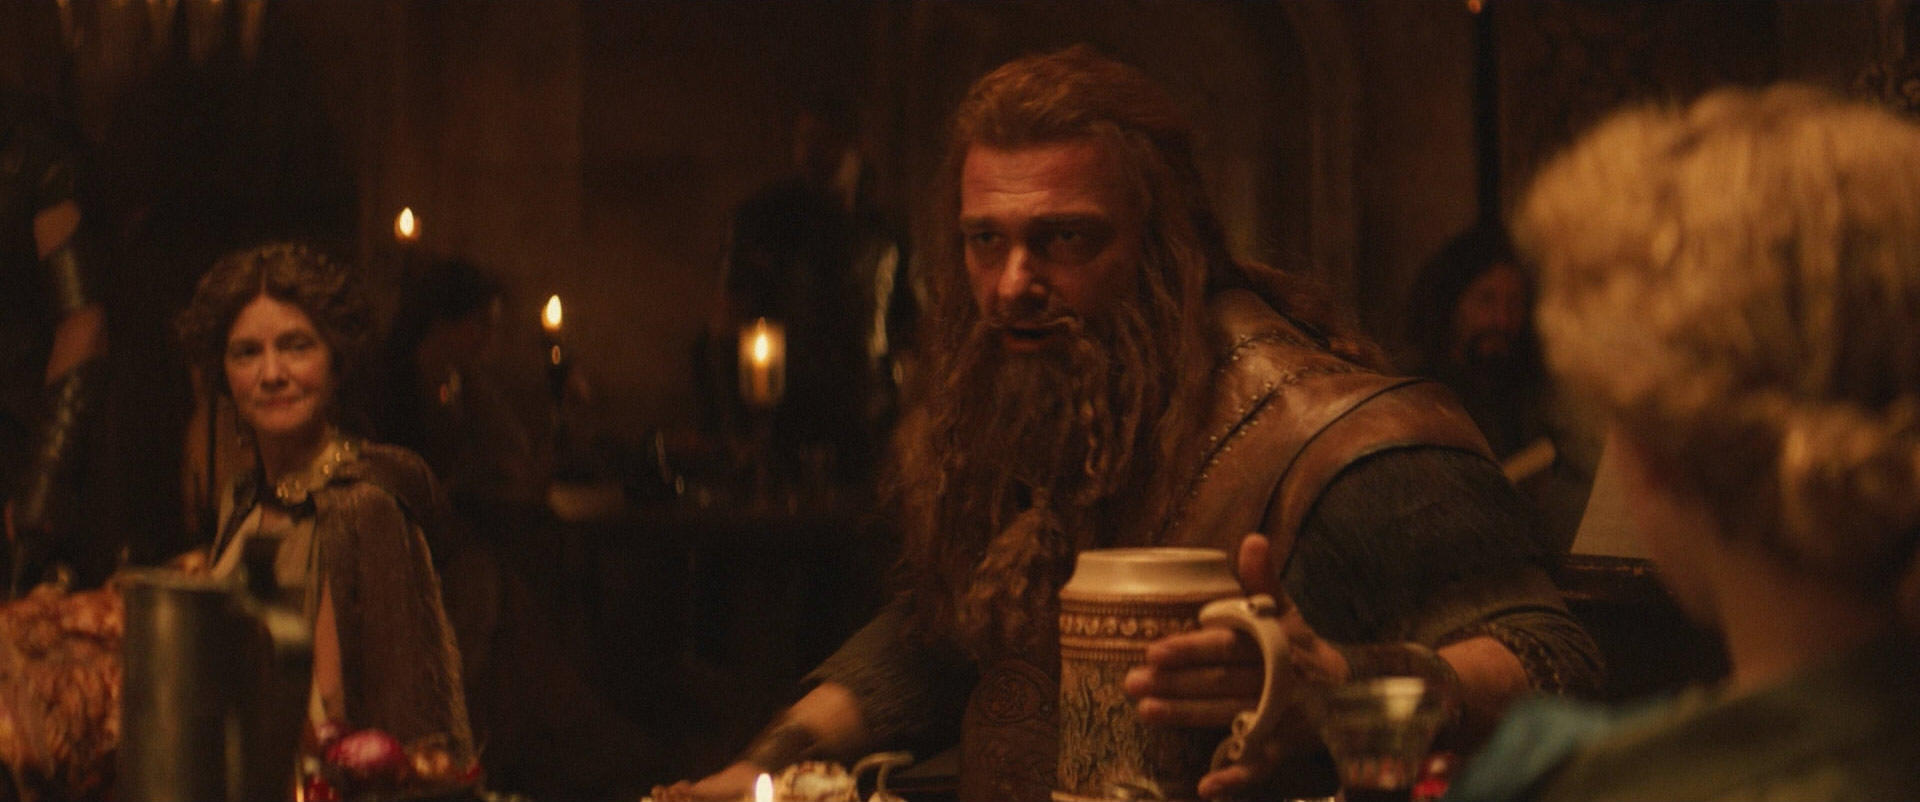 http://vignette2.wikia.nocookie.net/marvelcinematicuniverse/images/8/87/Volstaggpic.png/revision/latest?cb=20140310051445